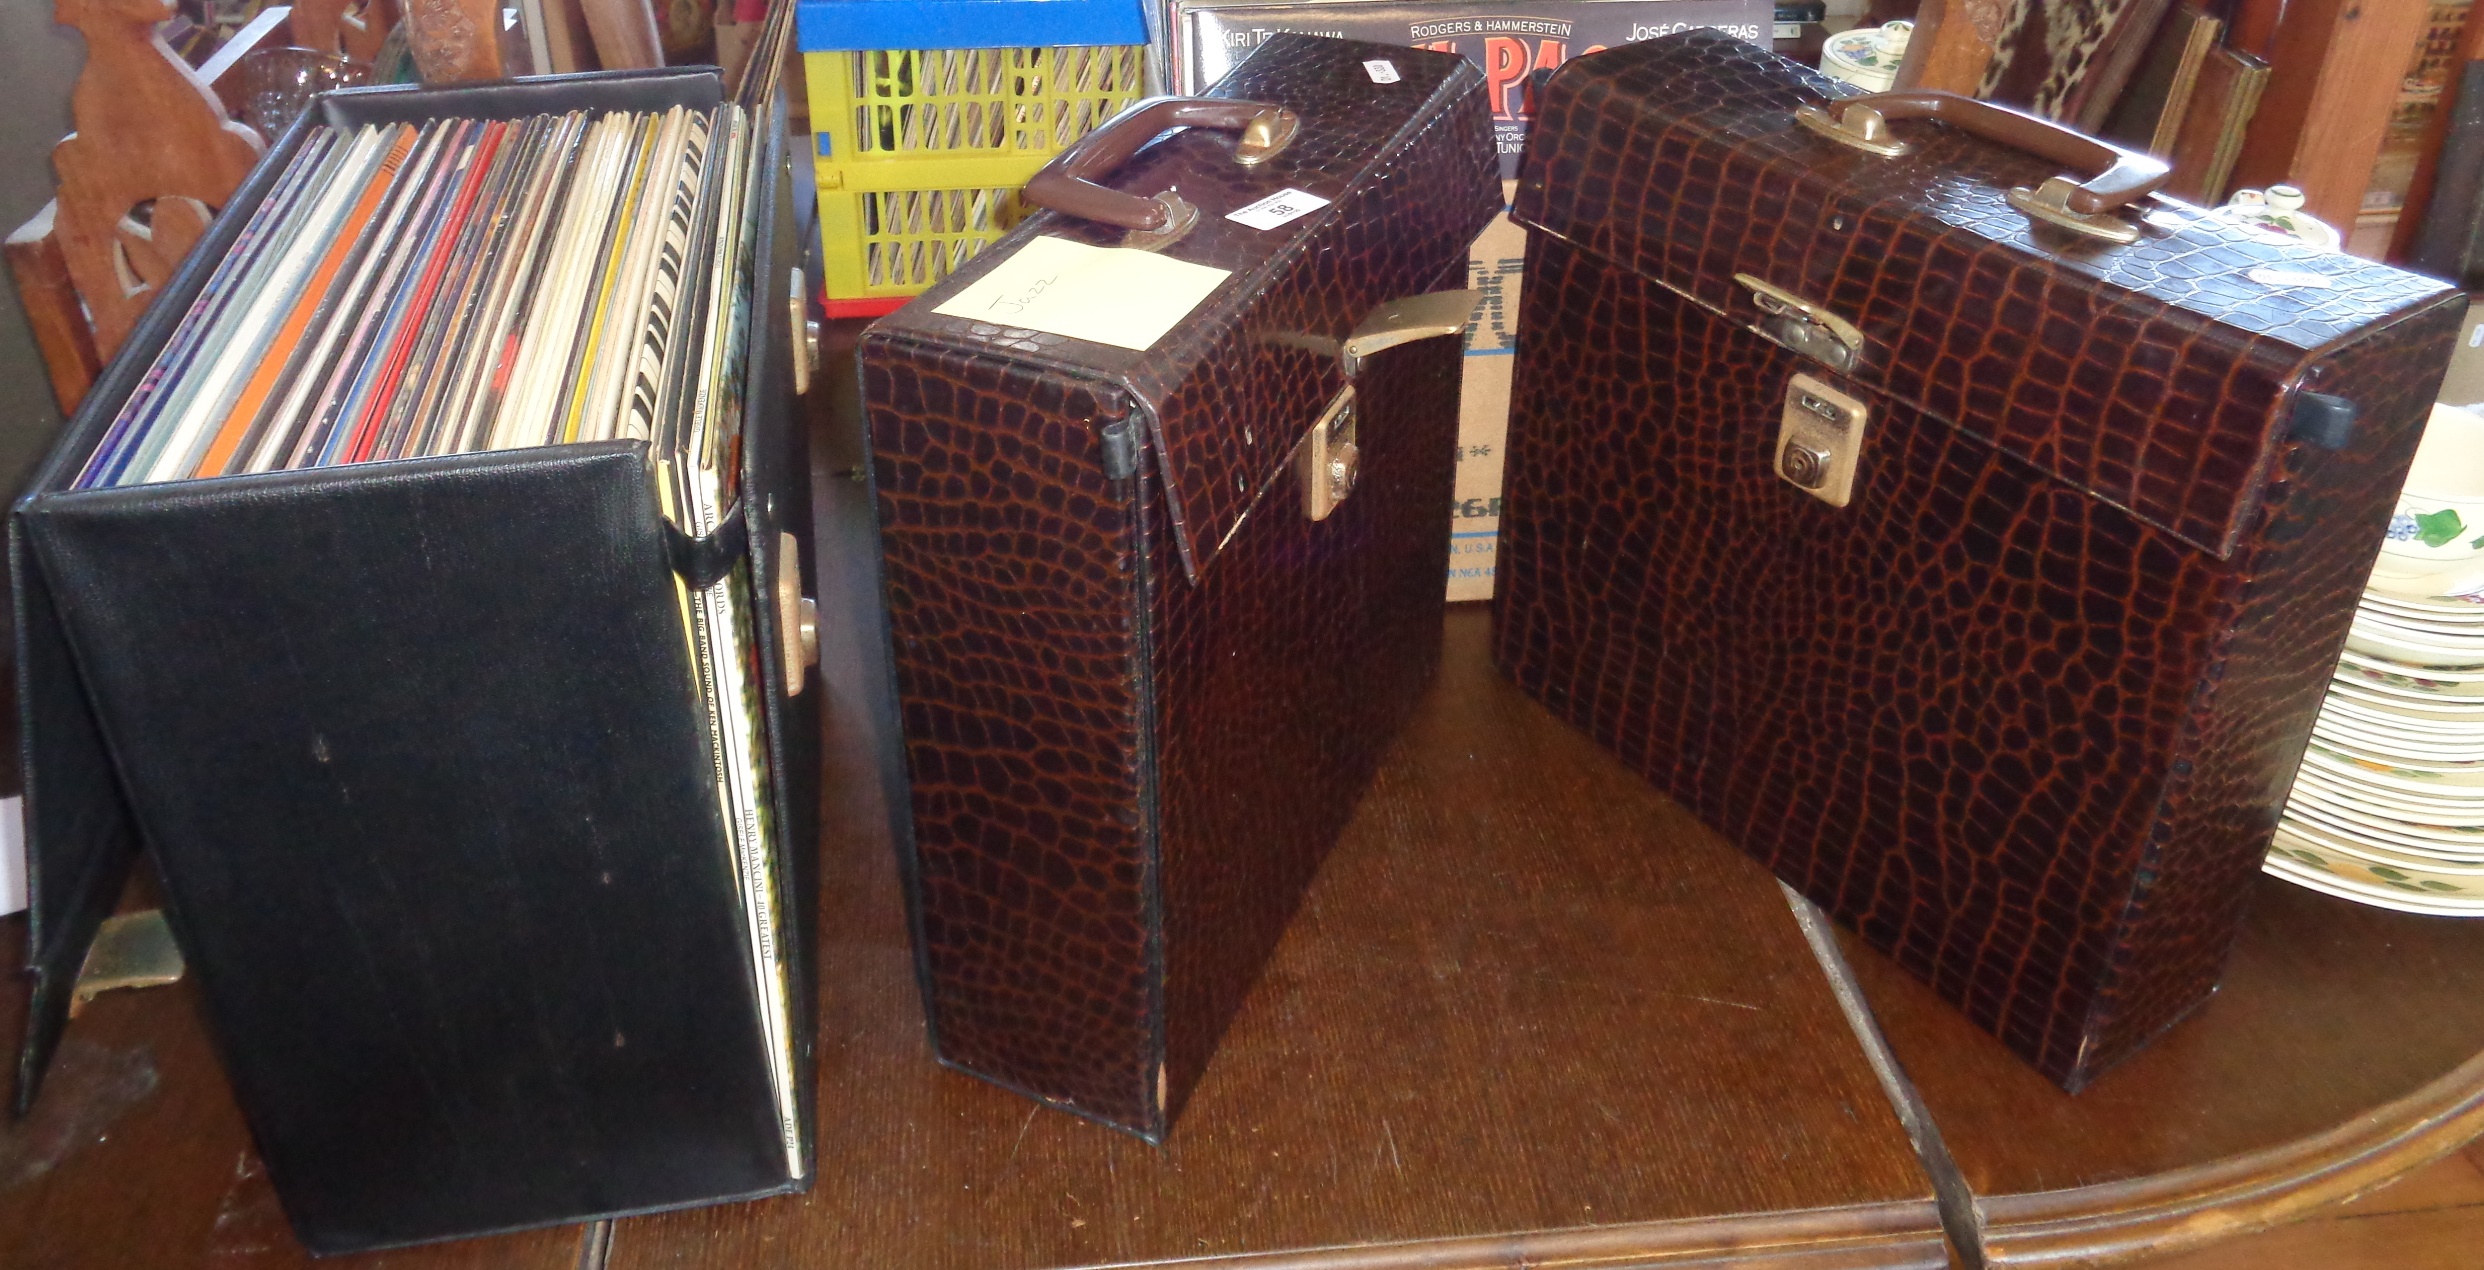 Three cases and a box of vinyl LPs, inc jazz and pop